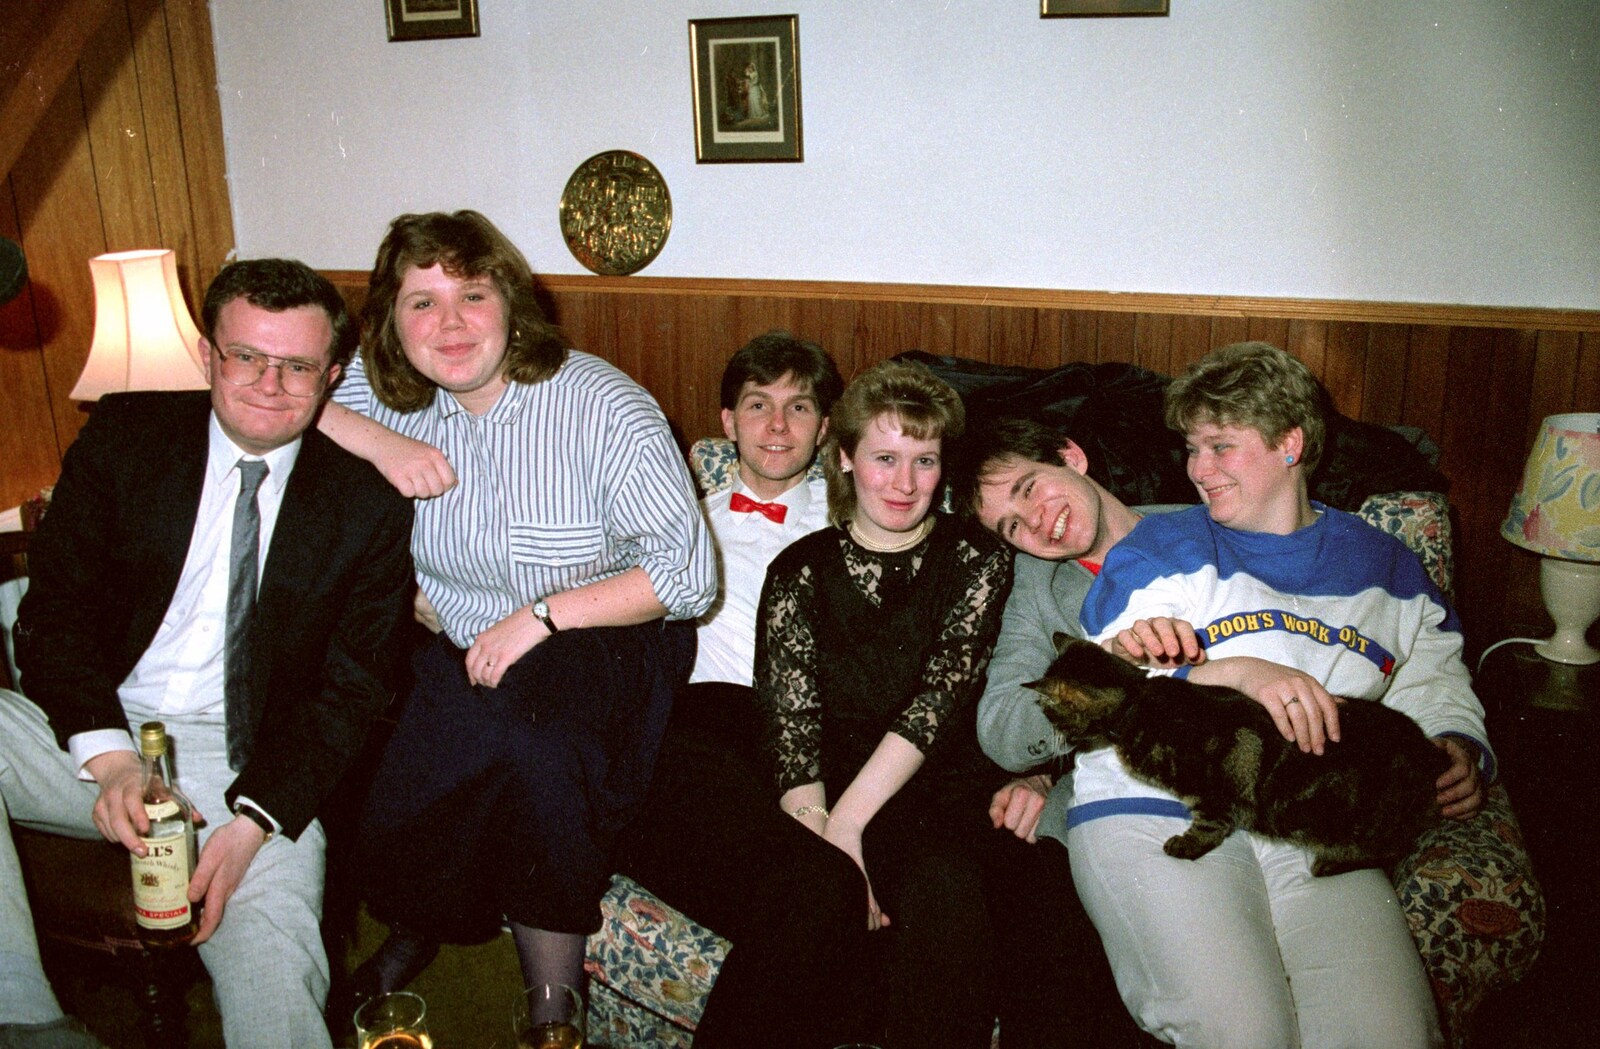 Hamish, Sis, Sean, Maria, Phil and Anna from Bransgore Barbeque and Soman-Wherry Drinks, Dorset and Norwich - 2nd April 1988